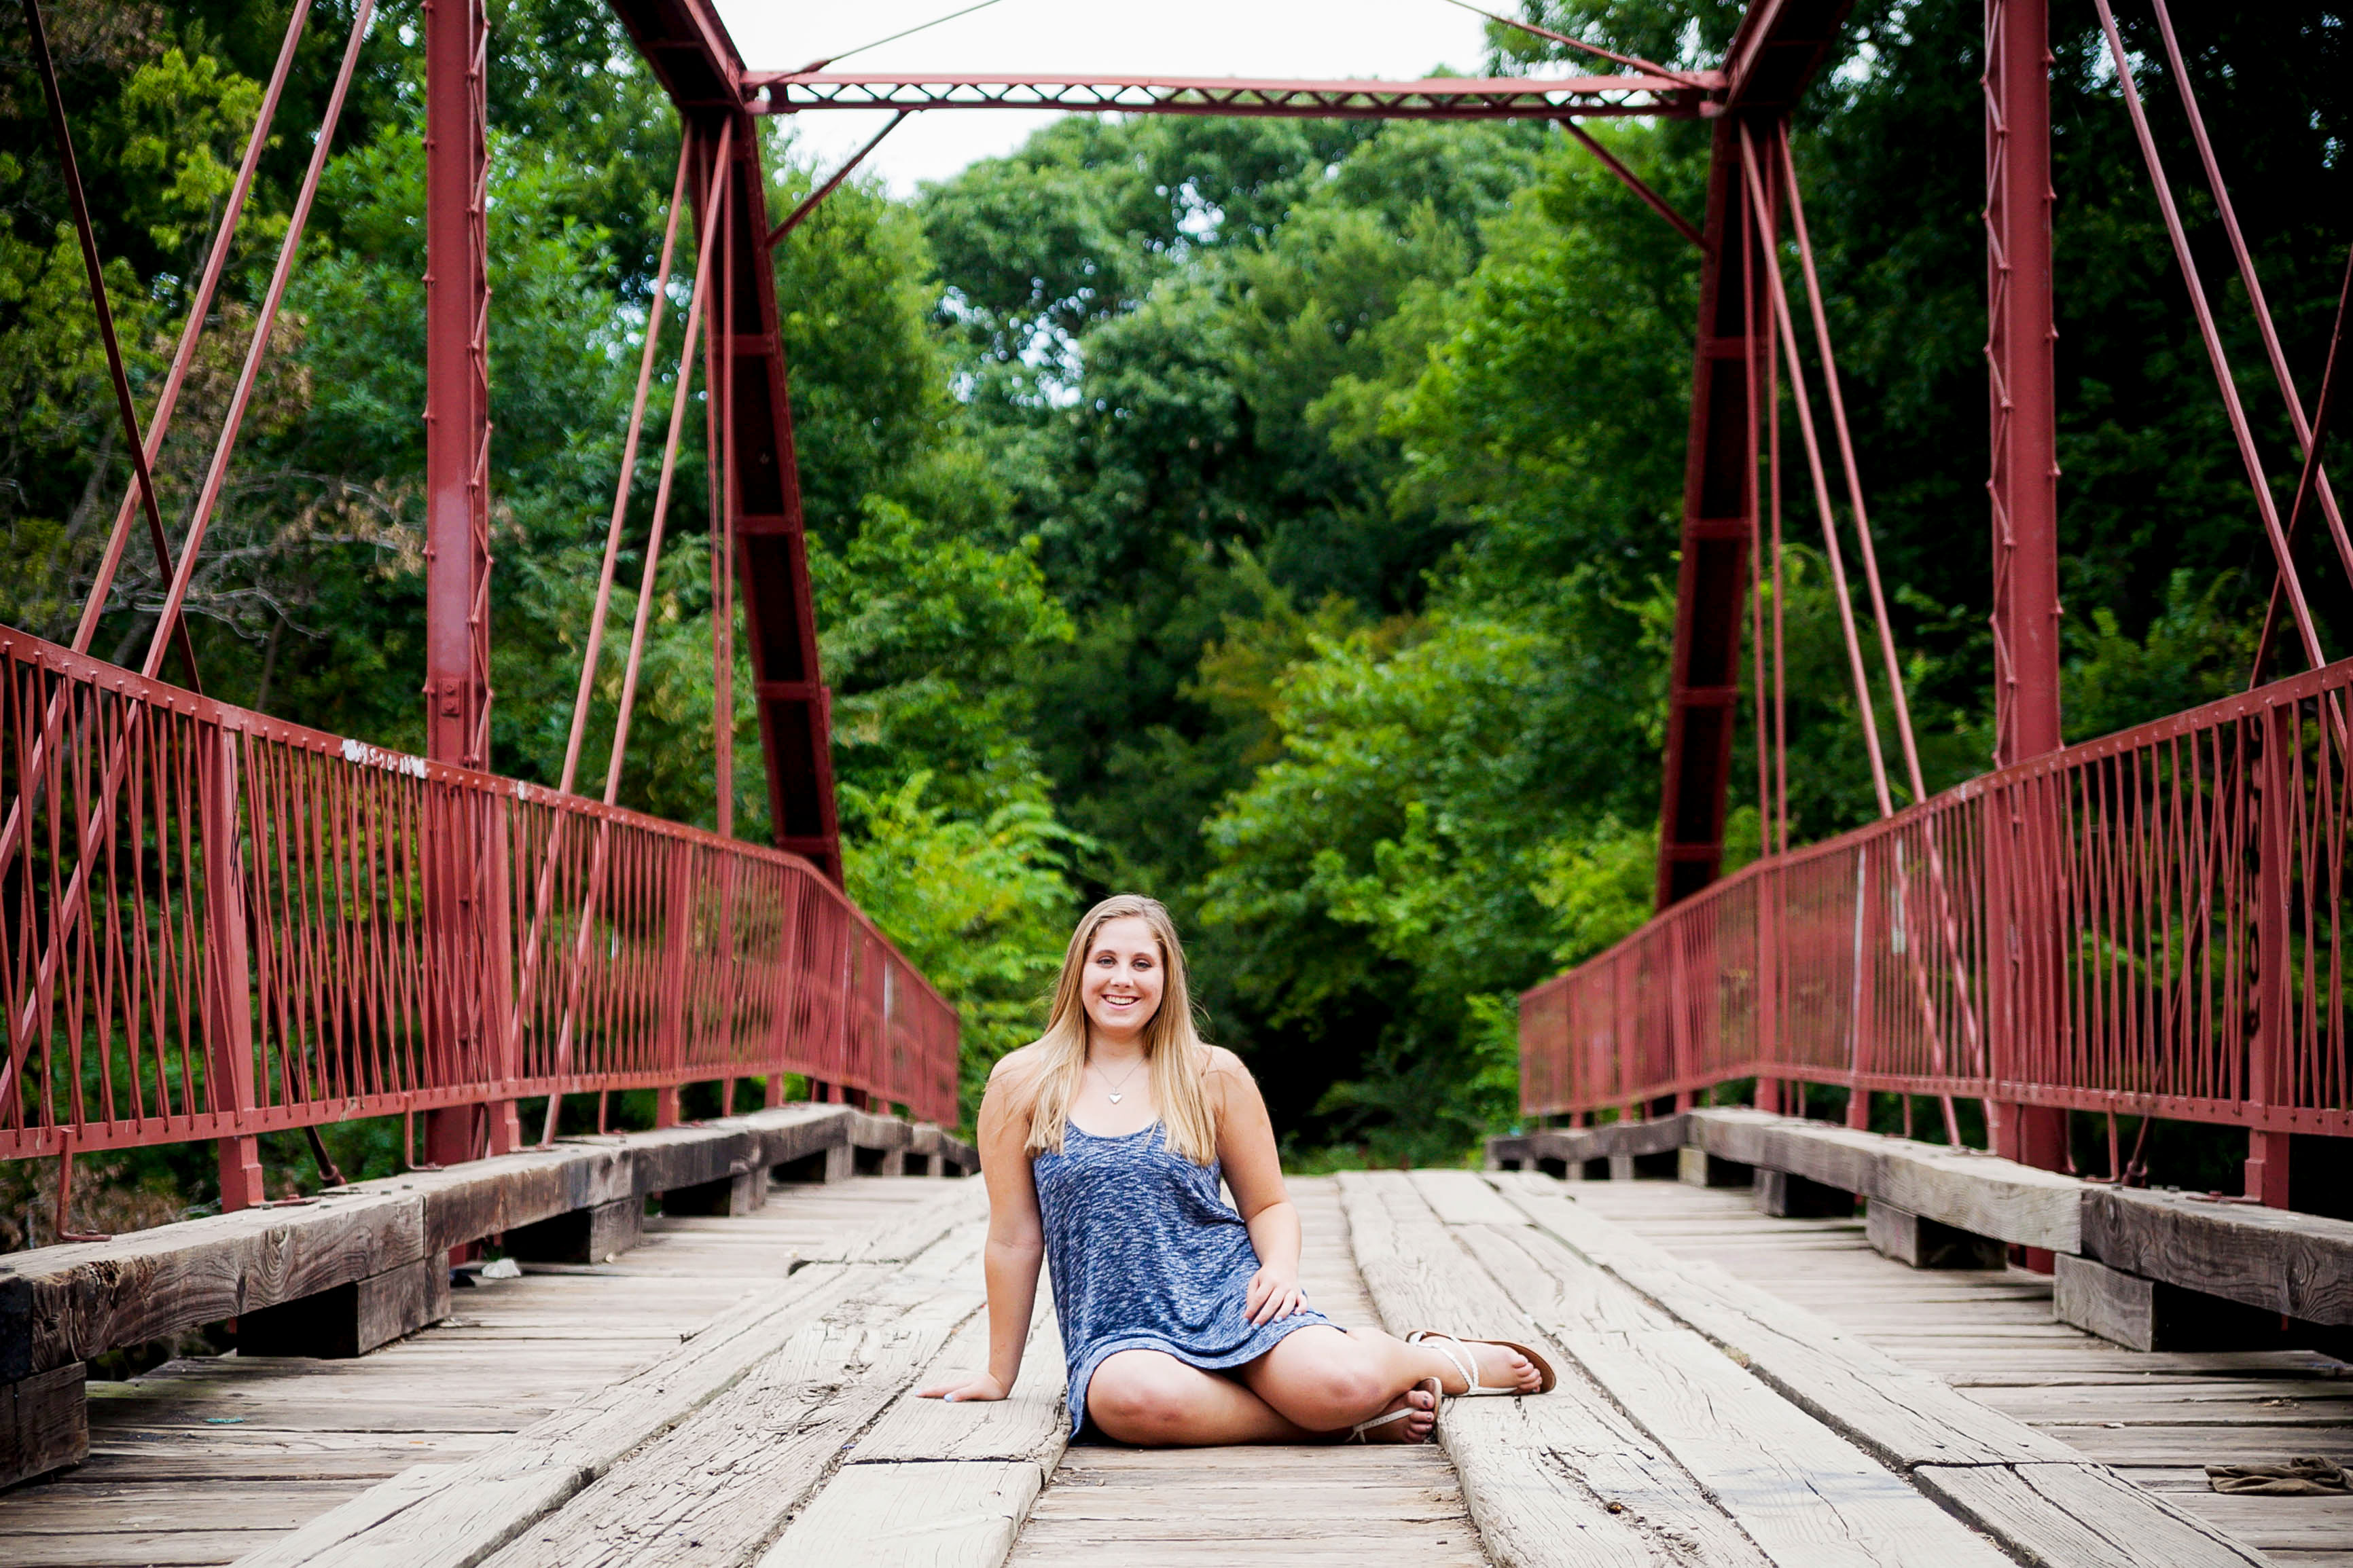 Senior portraits photographed at the Dallas Arboretum by photographer Amber Knauss of Golightly Images